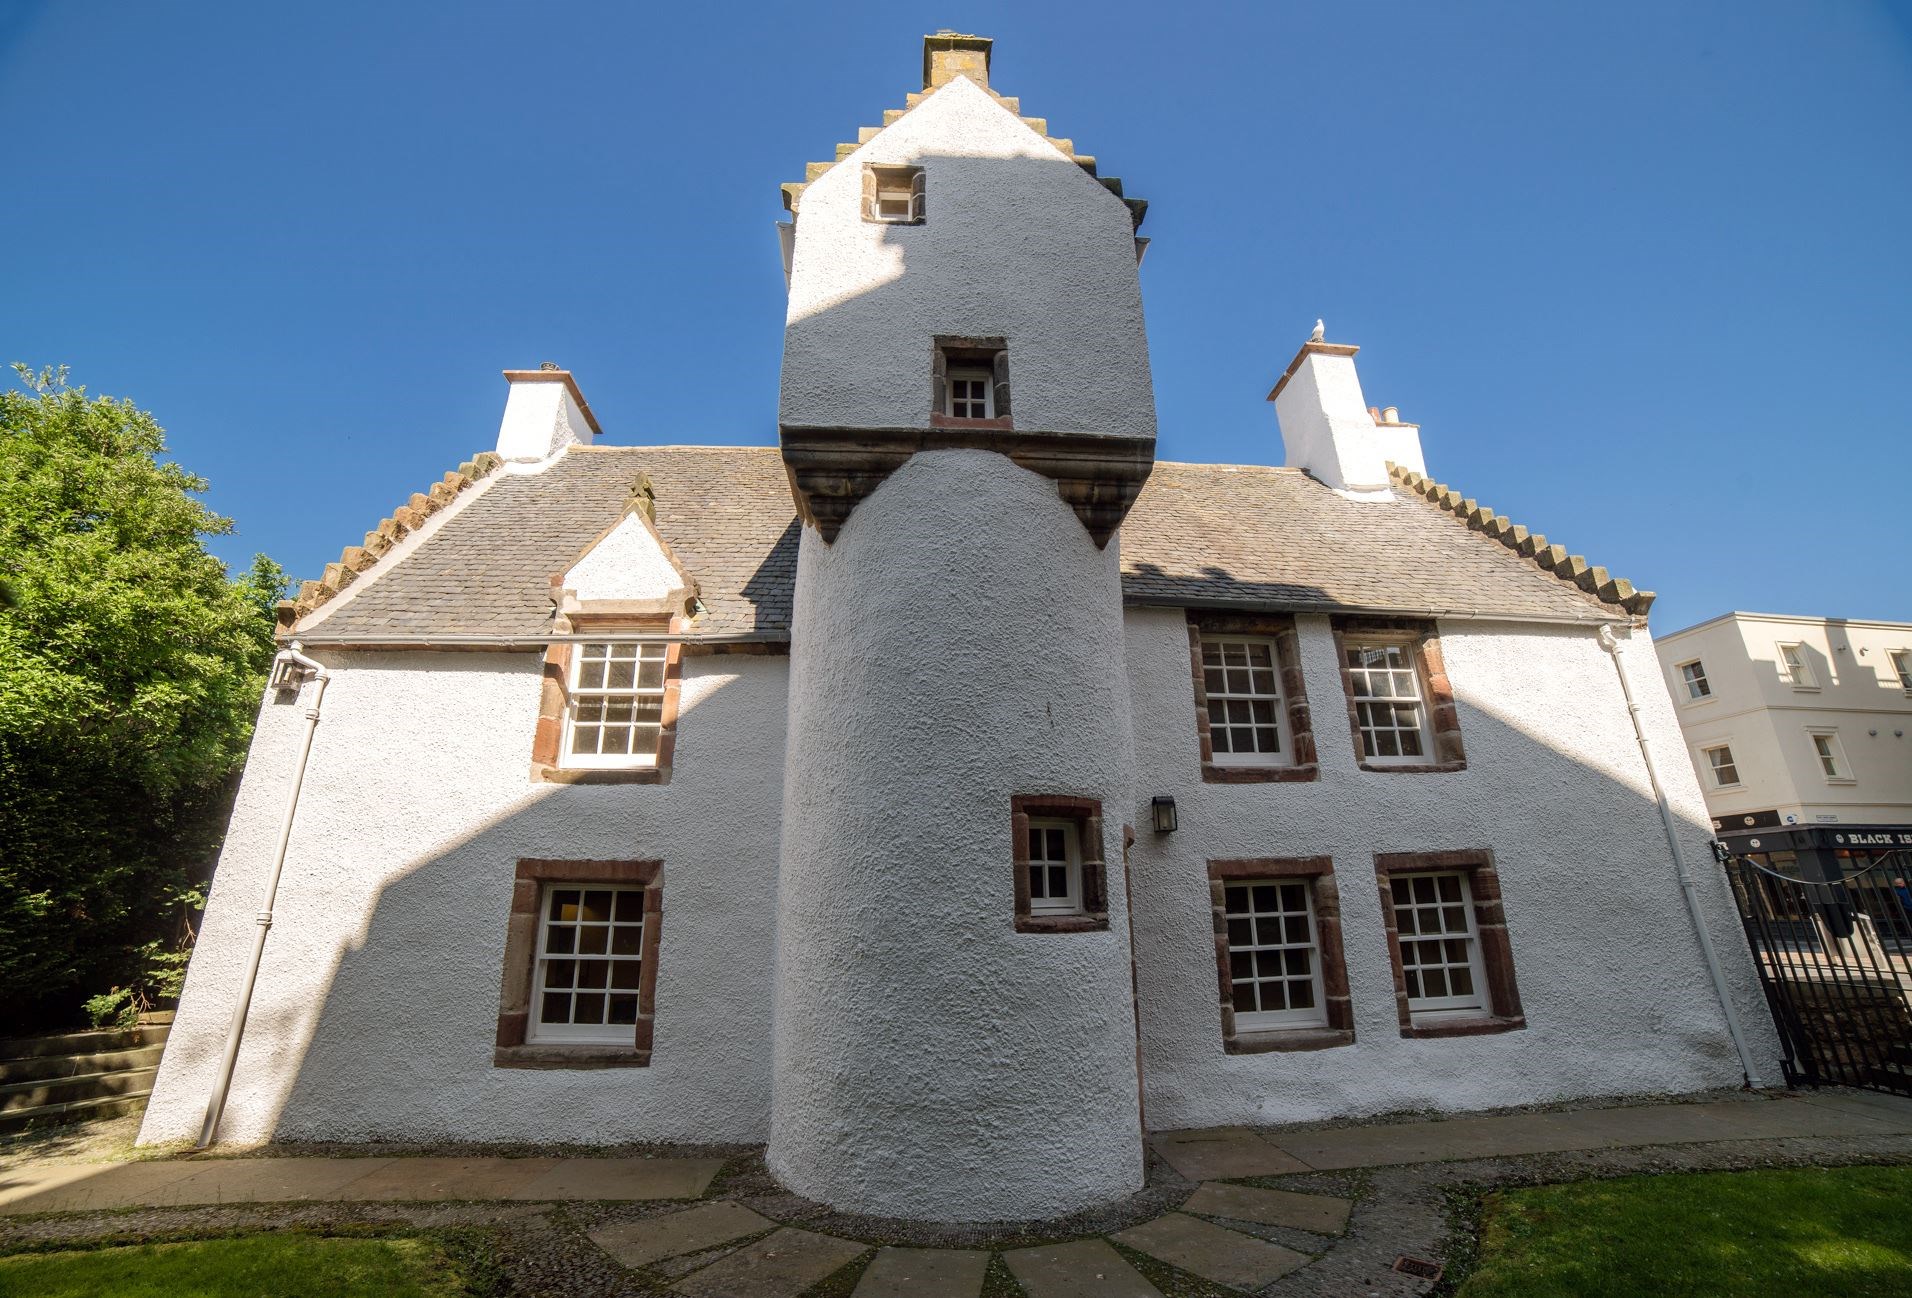 The oldest house in Inverness.